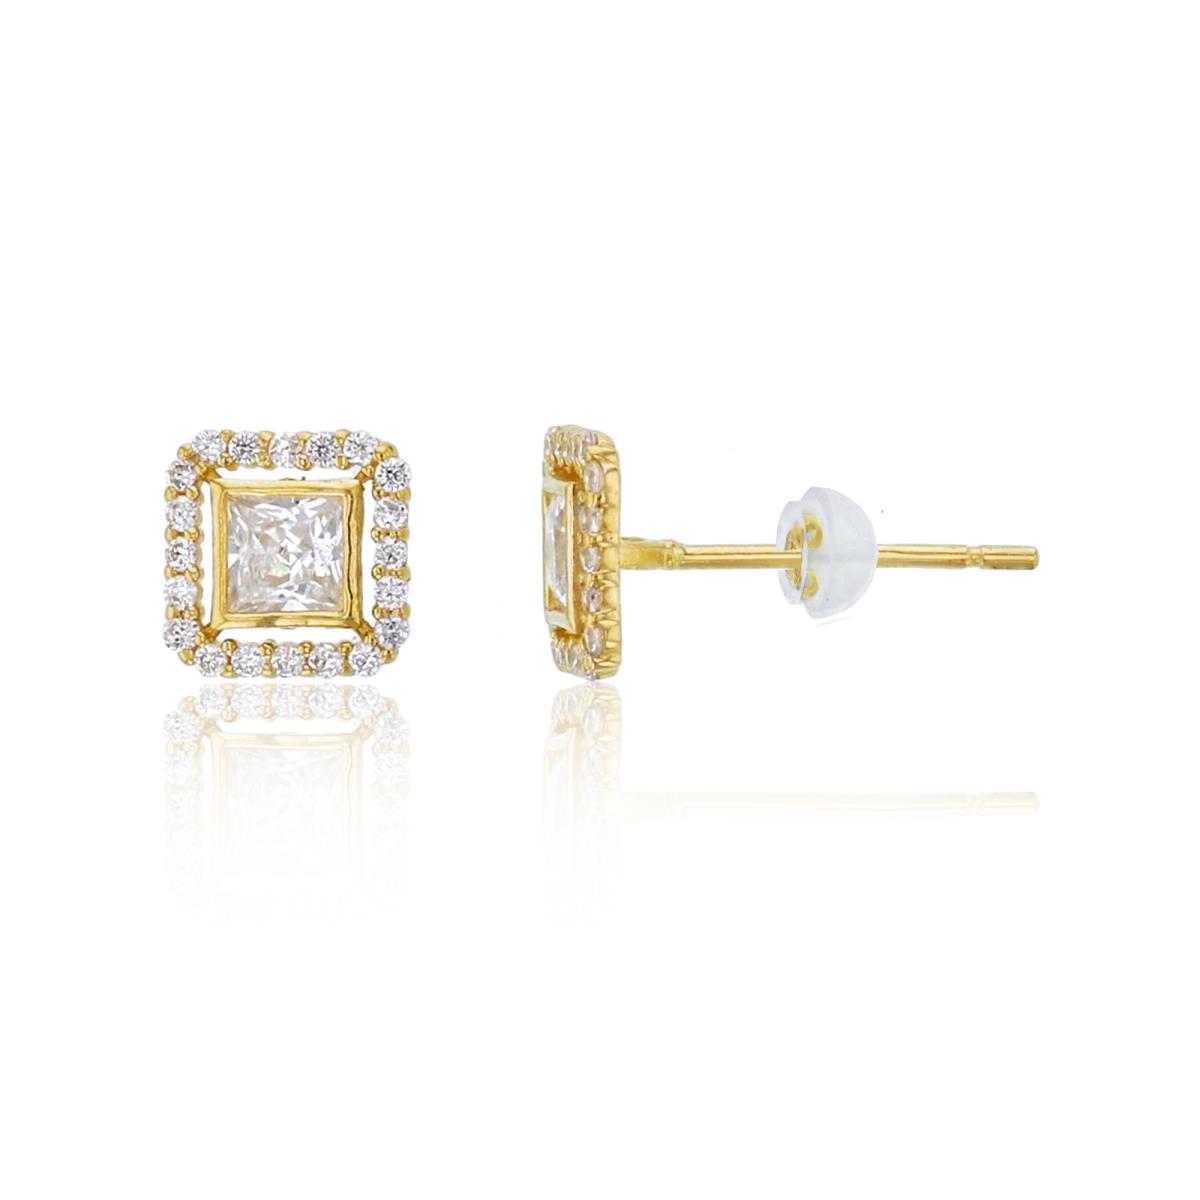 10K Yellow Gold 3mm Square CZ Halo Stud Earring with Silicone Back